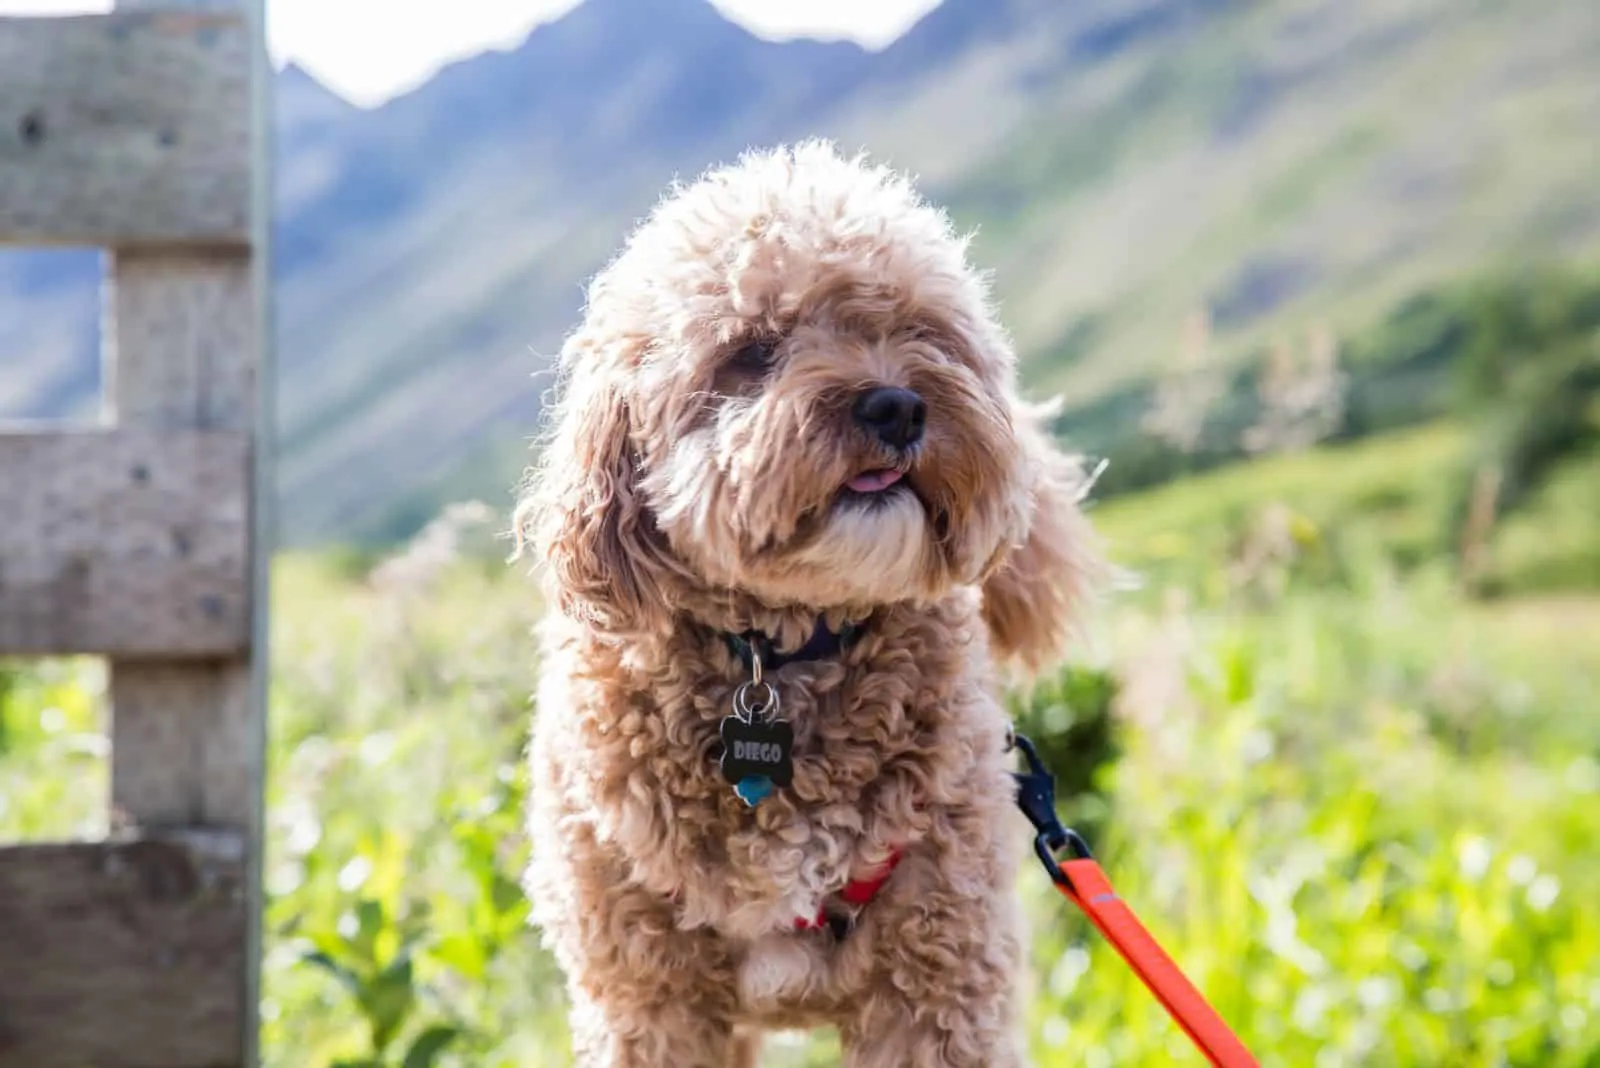 Cavapoo walks in the field with a leash